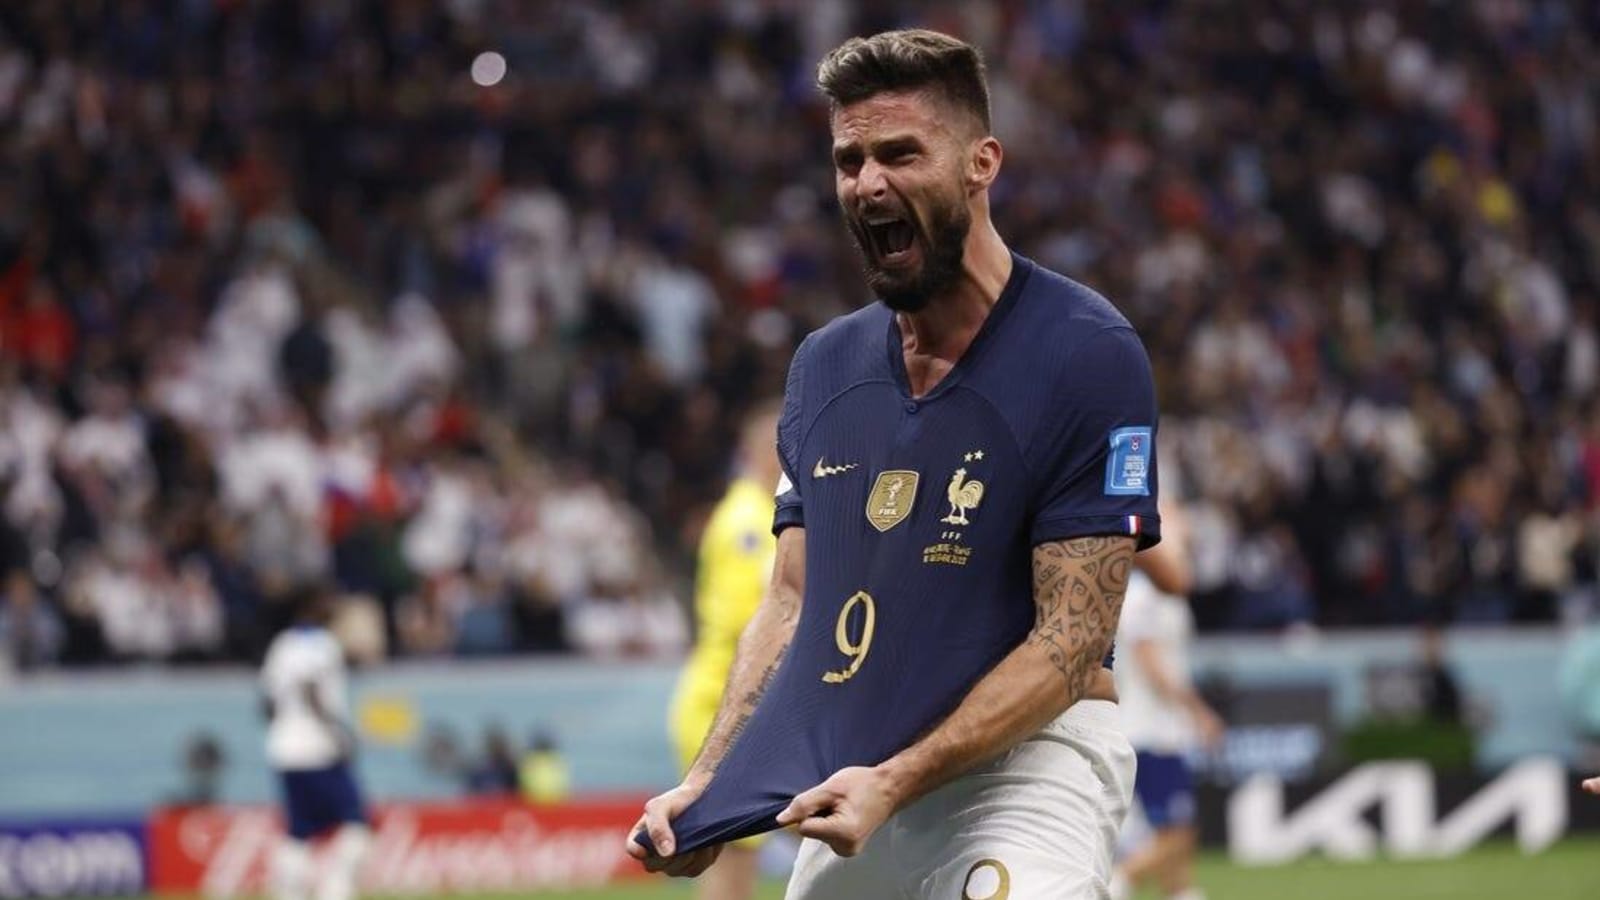 French star Olivier Giroud confirms plans to join MLS